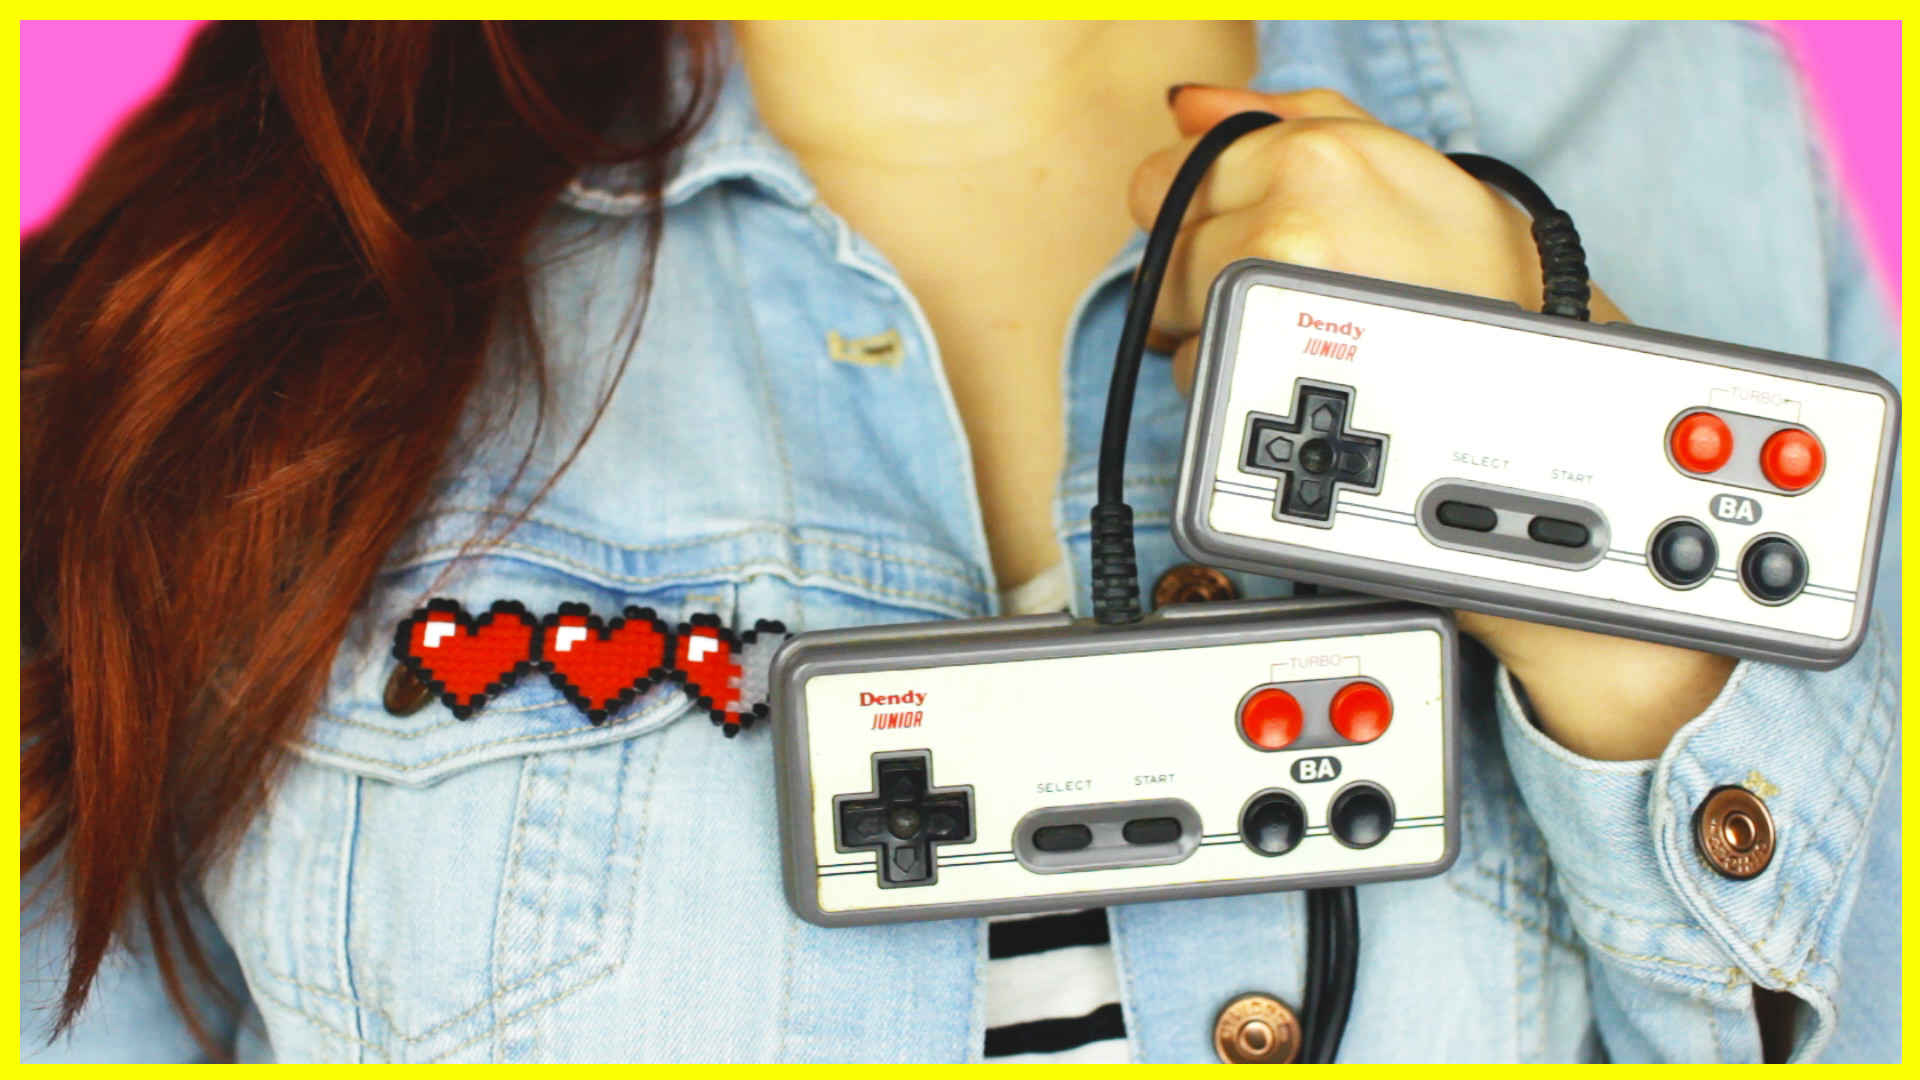 Nerdy Gift Ideas For Boyfriend
 Awesome DIY Gift Ideas For Gamers & Geeks Makoccino